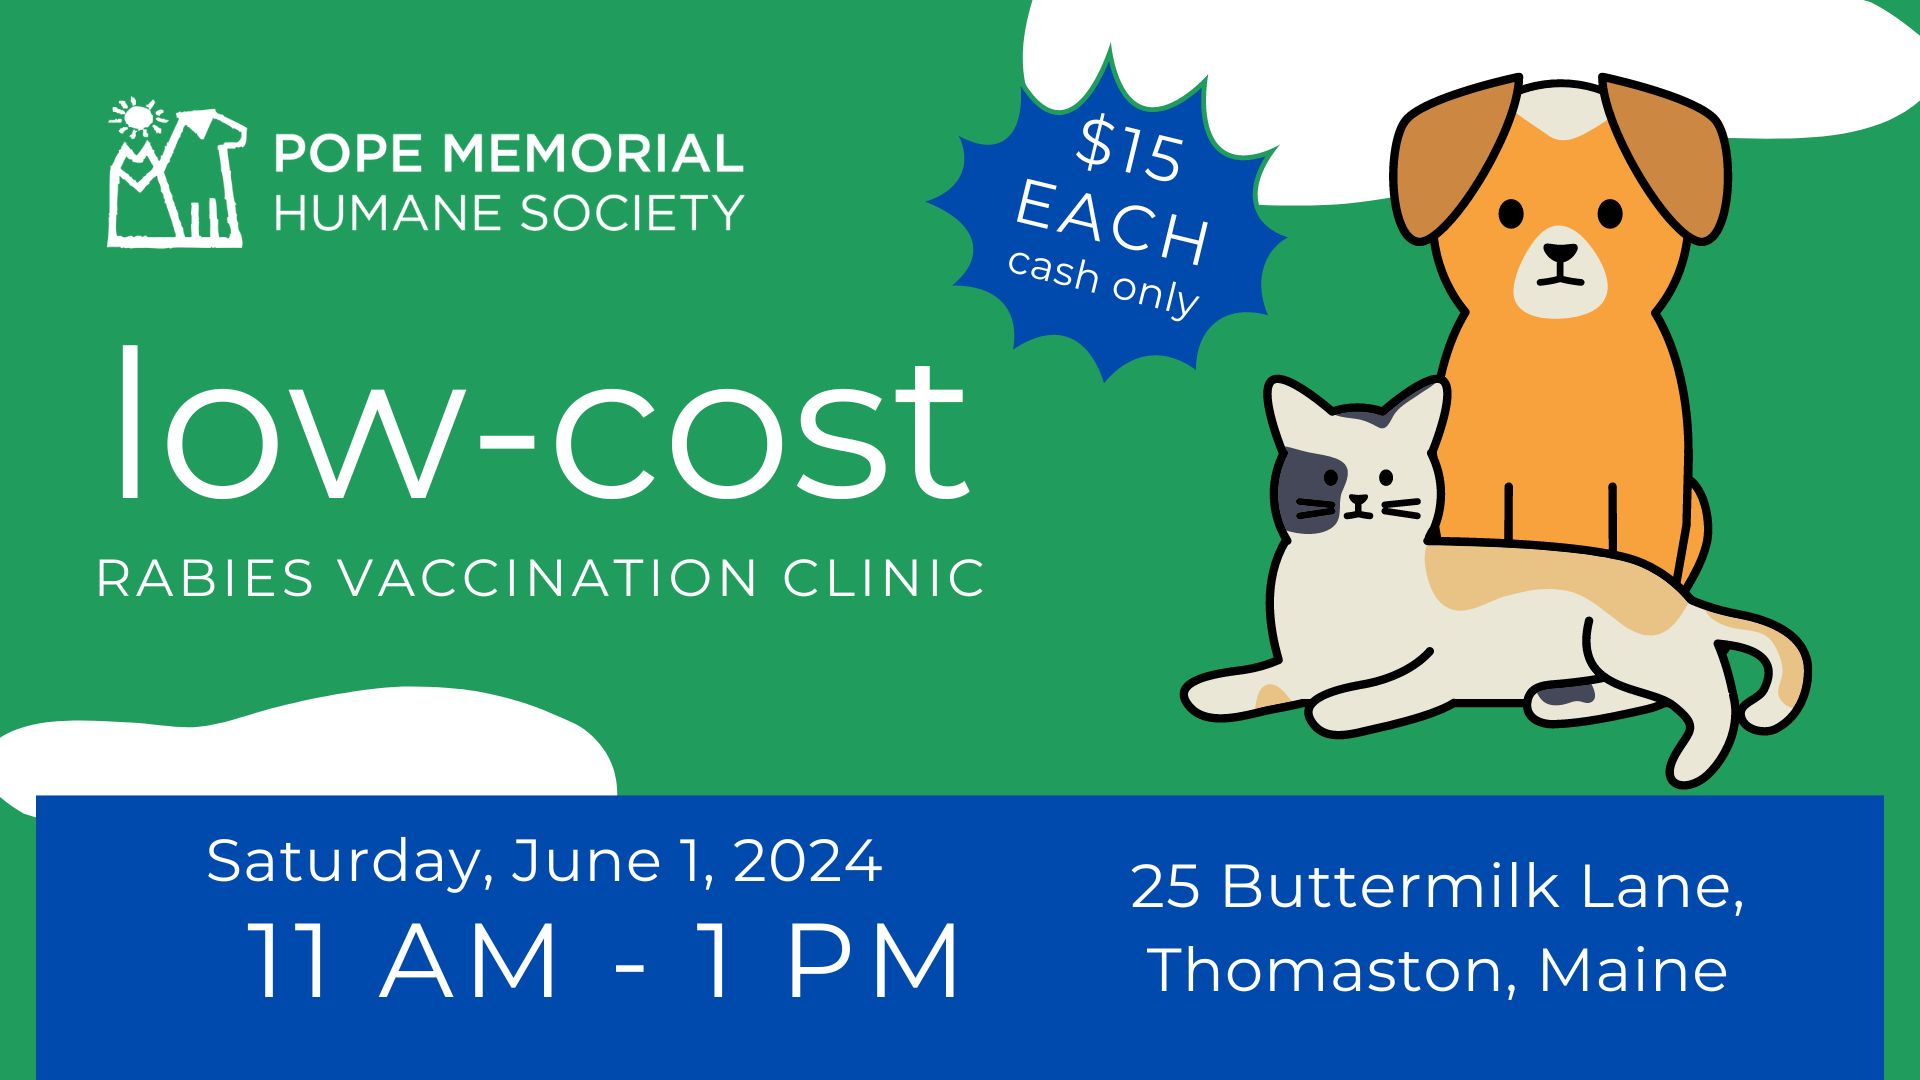 Pope Memorial Humane Society Hosts Low-Cost Rabies Vaccination Clinic!